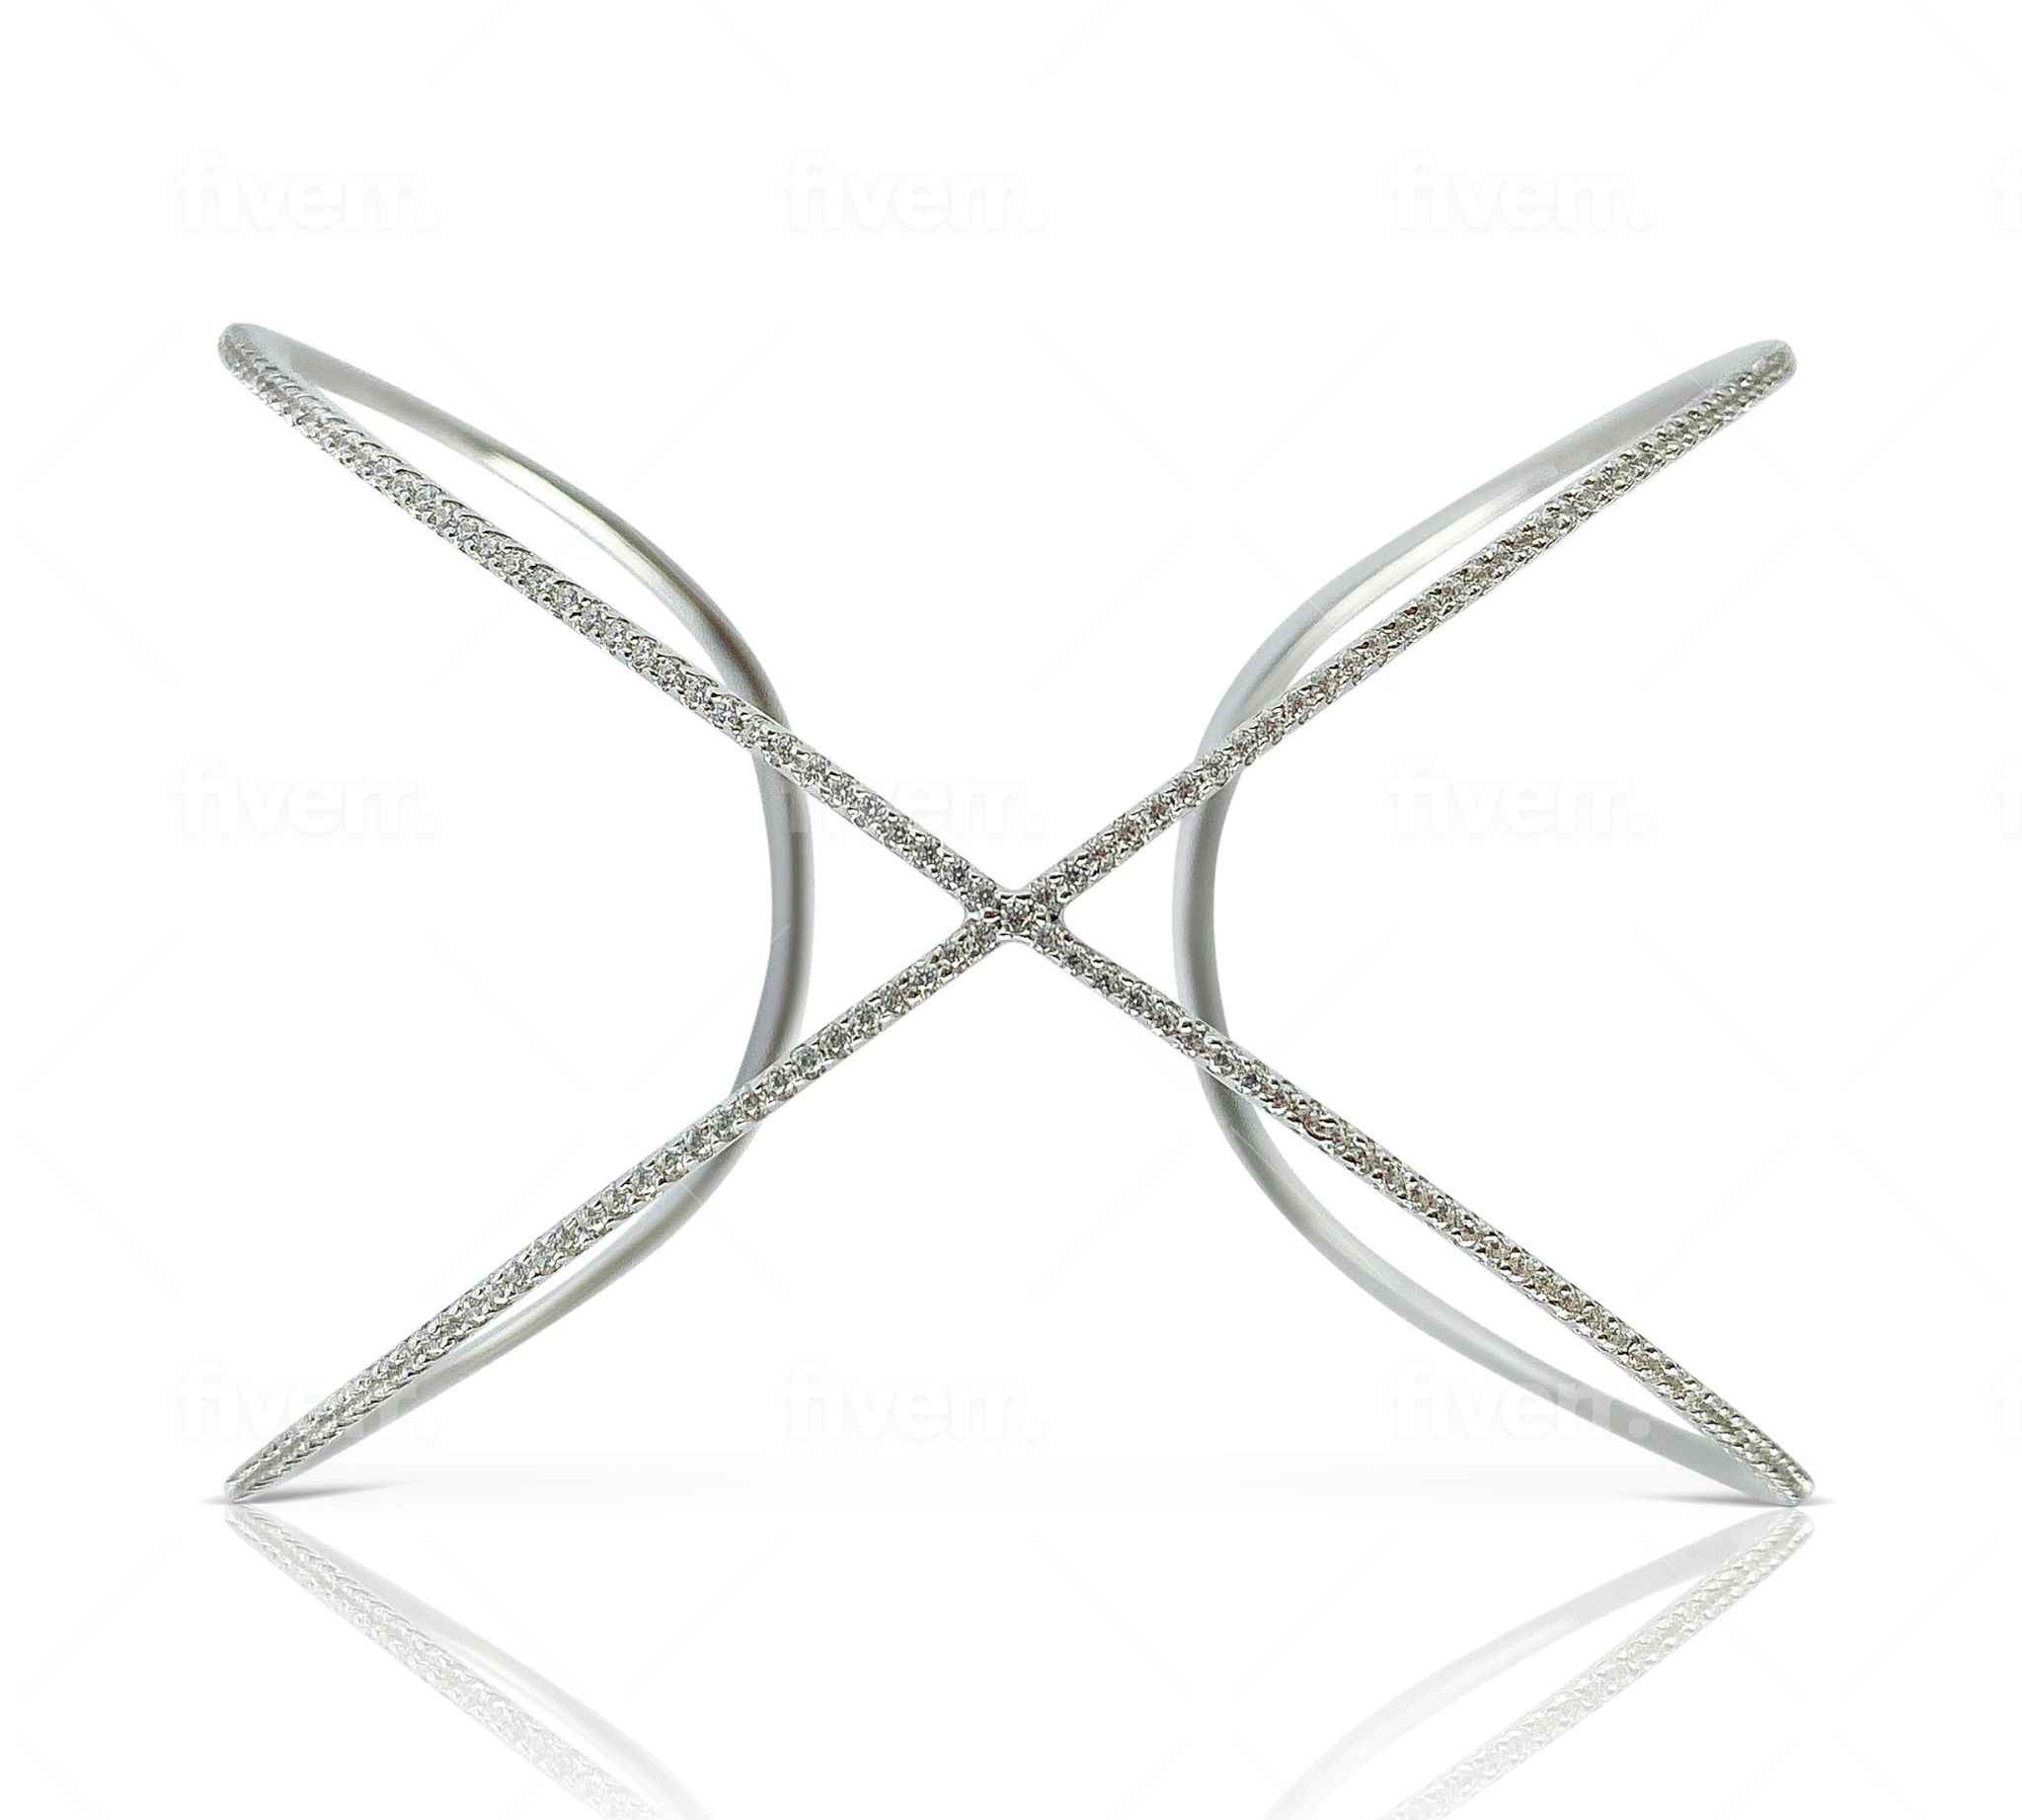 Elegant Waverly Cross Bangle in 925 Sterling Silver by Alessandra James.